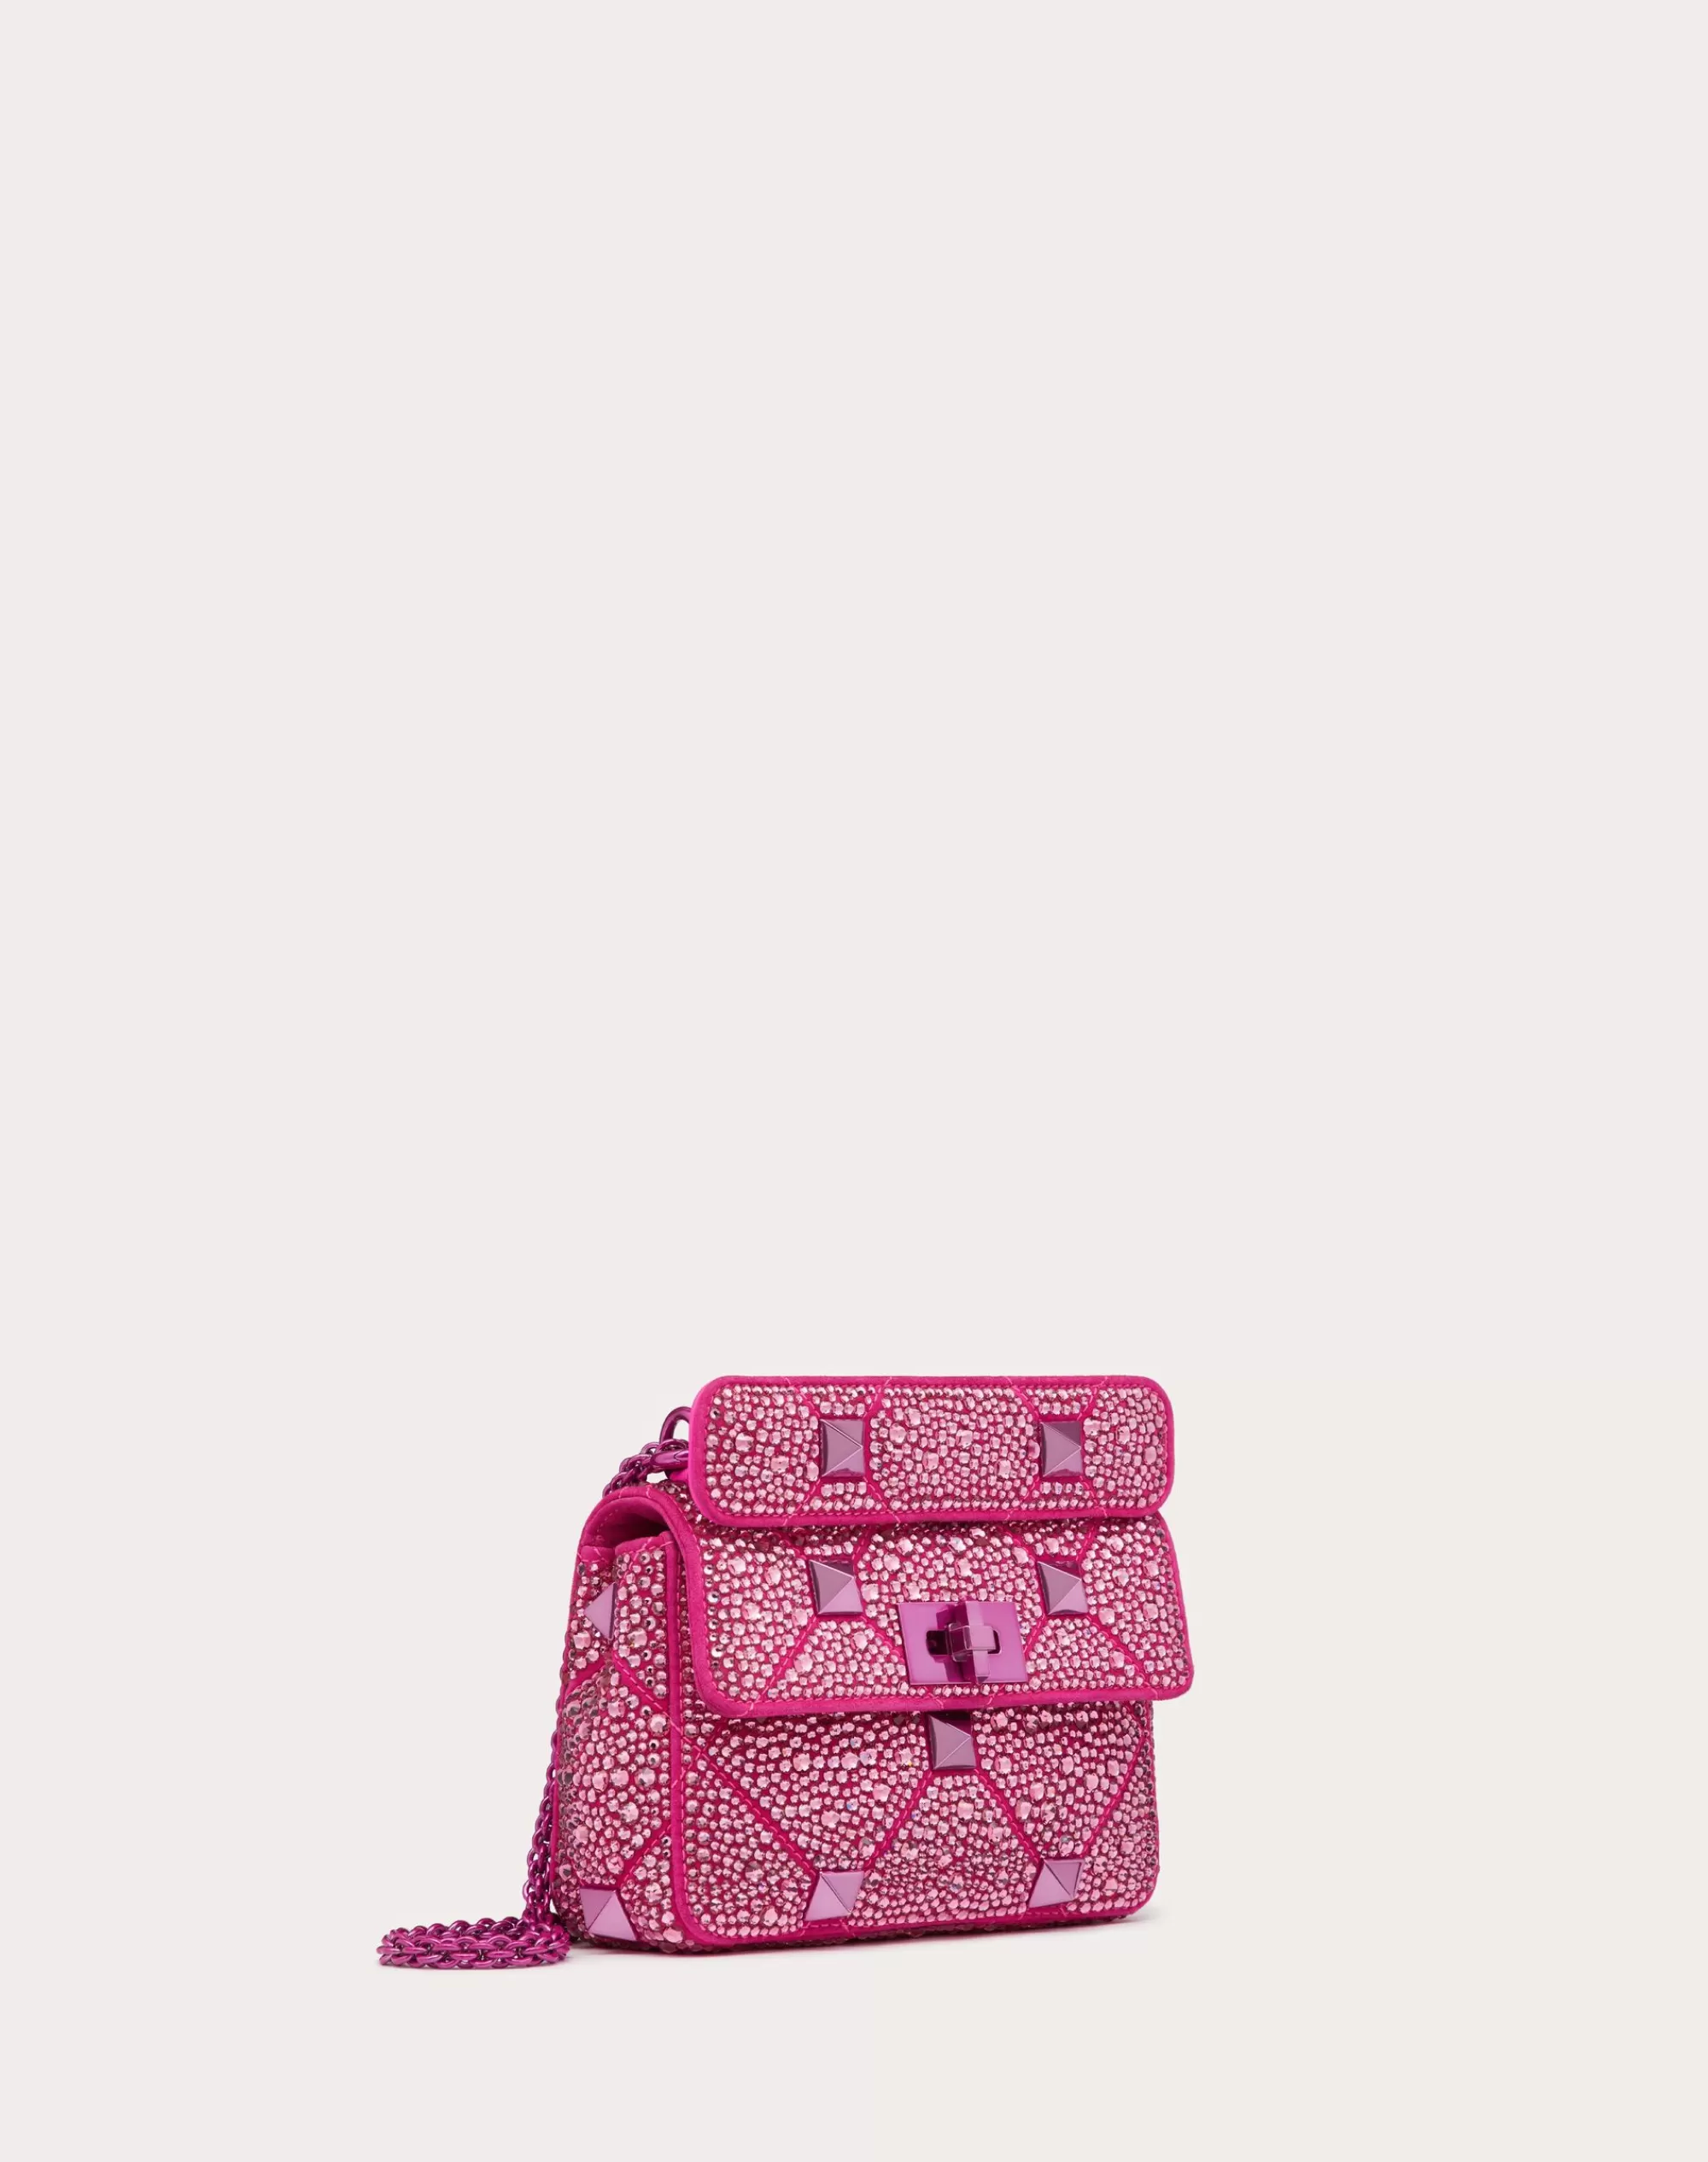 Valentino SMALL ROMAN STUD THE SHOULDER BAG CHAIN WITH SPARKLING EMBROIDERY PinkPp Flash Sale